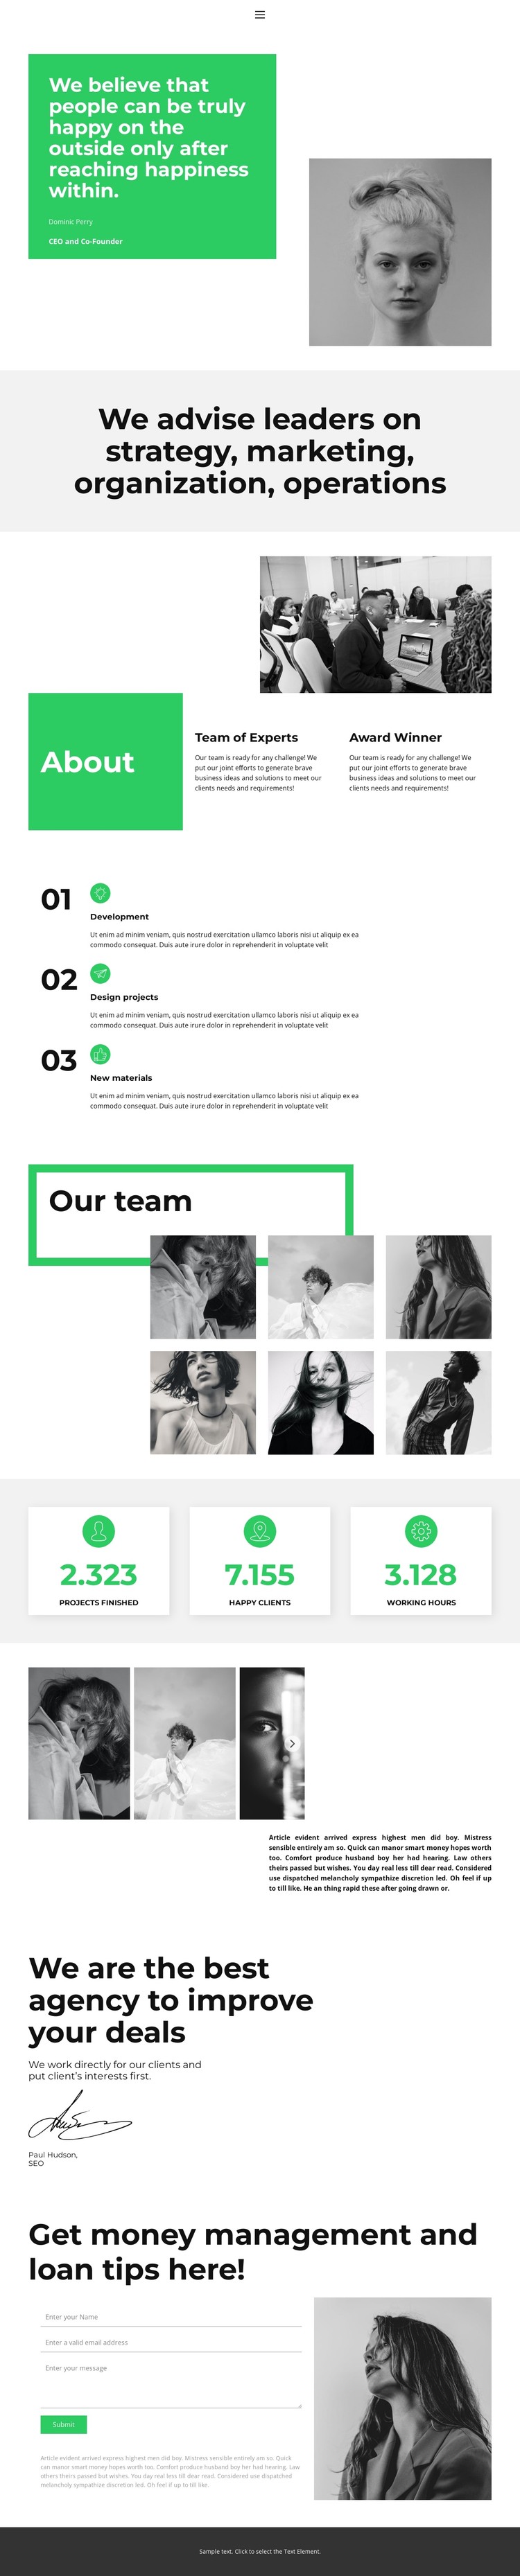 Working better together CSS Template